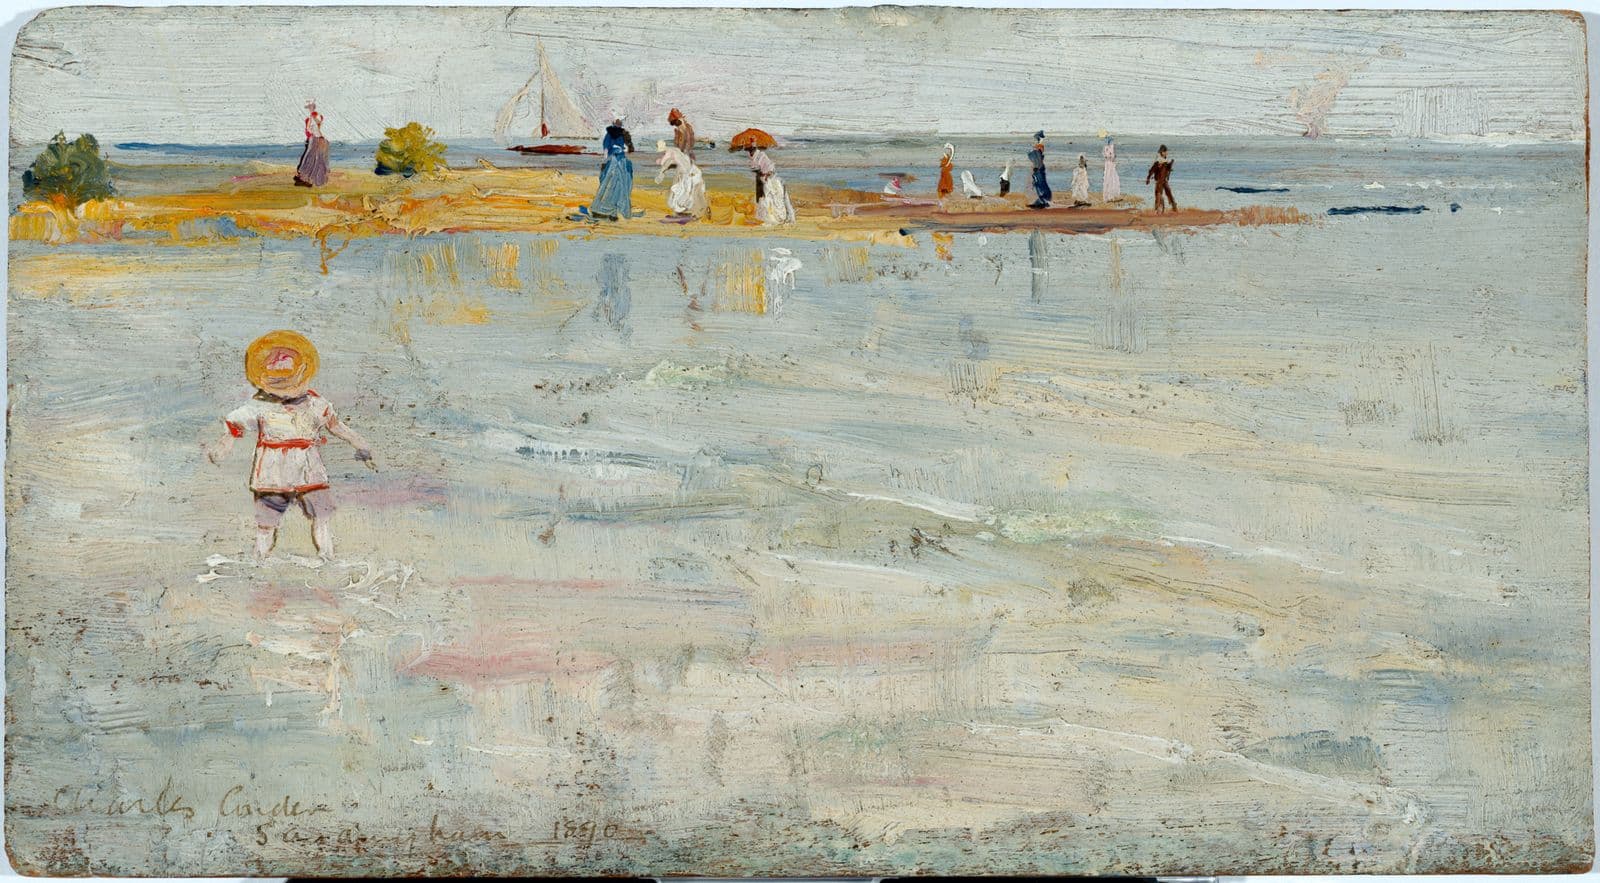 Impressionist landscape painting of a day at the beach, child in the foreground, a group of people and a sailing boat in the background